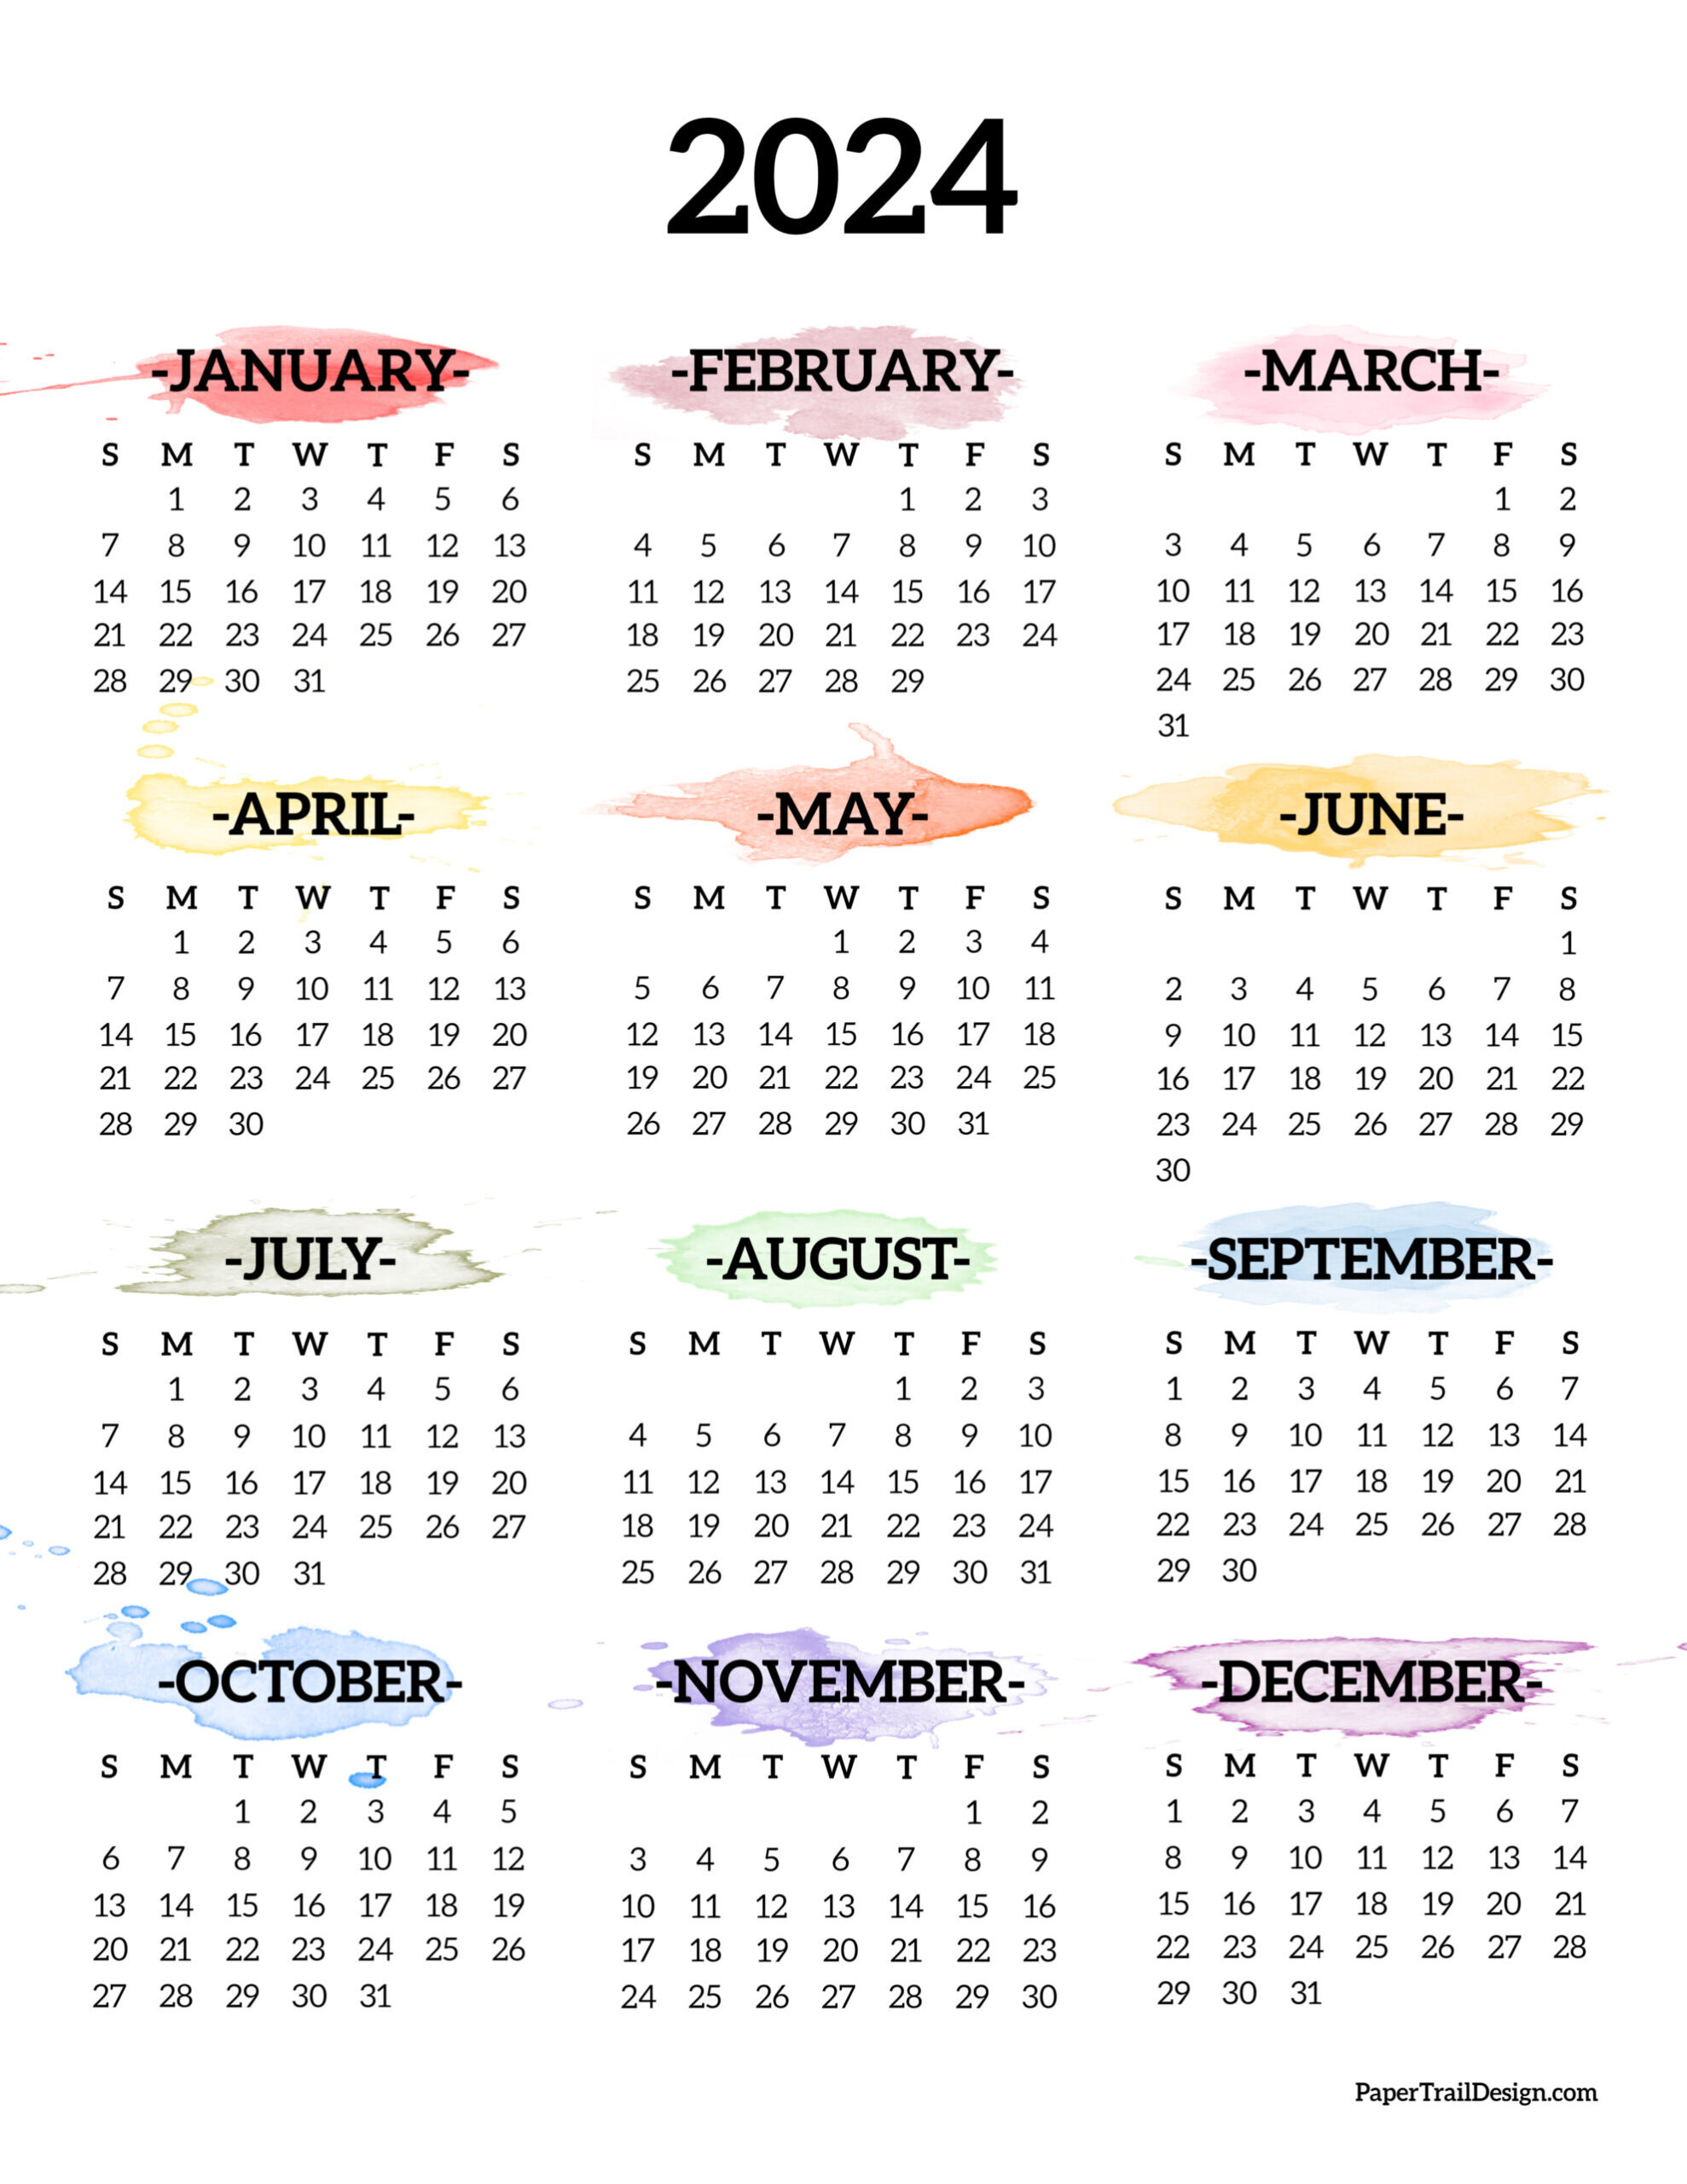 Calendar 2024 Printable One Page - Paper Trail Design for One Page Printable 2024 Calendar